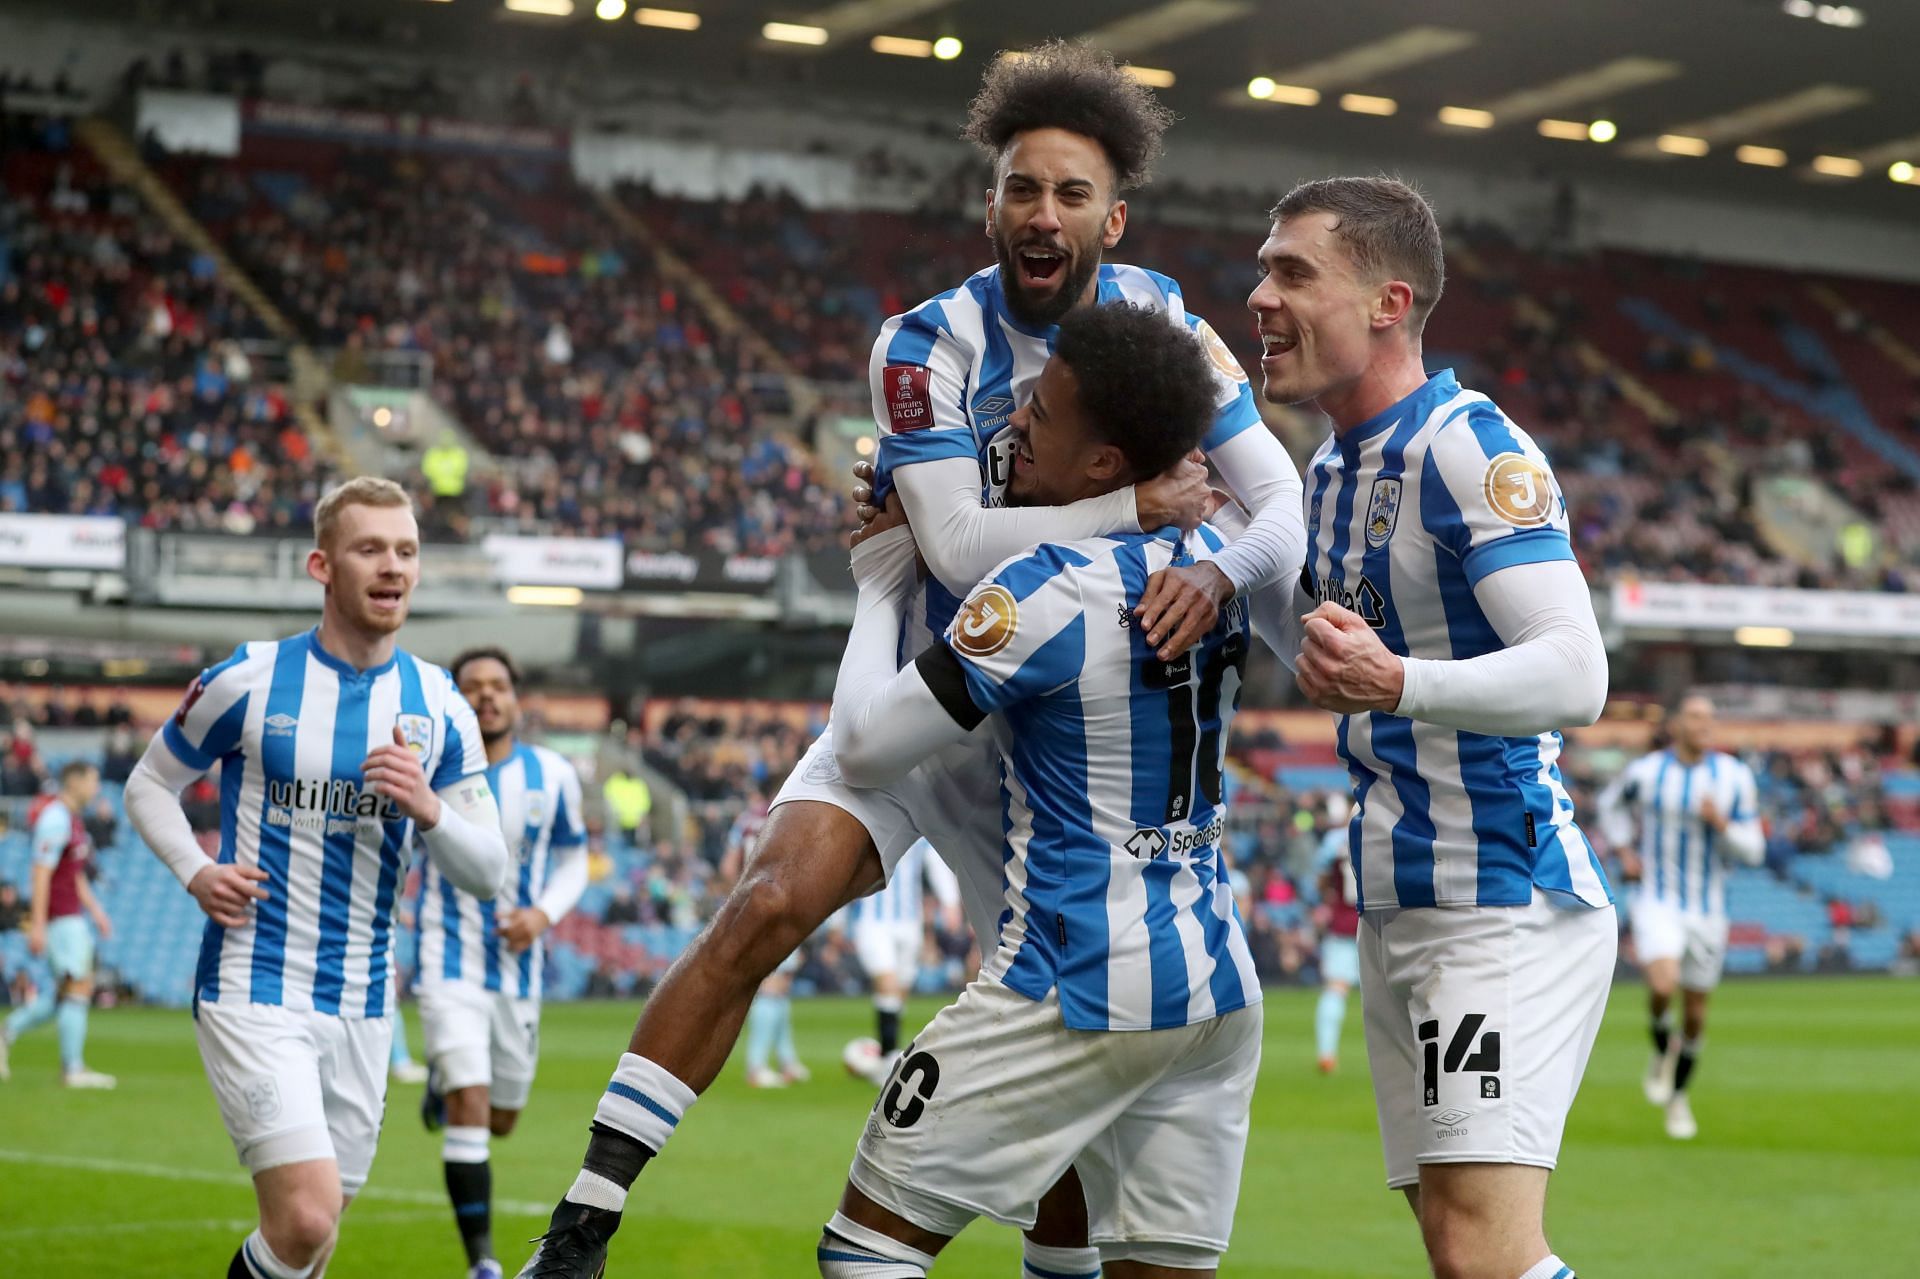 Huddersfield are looking to advance to the next round